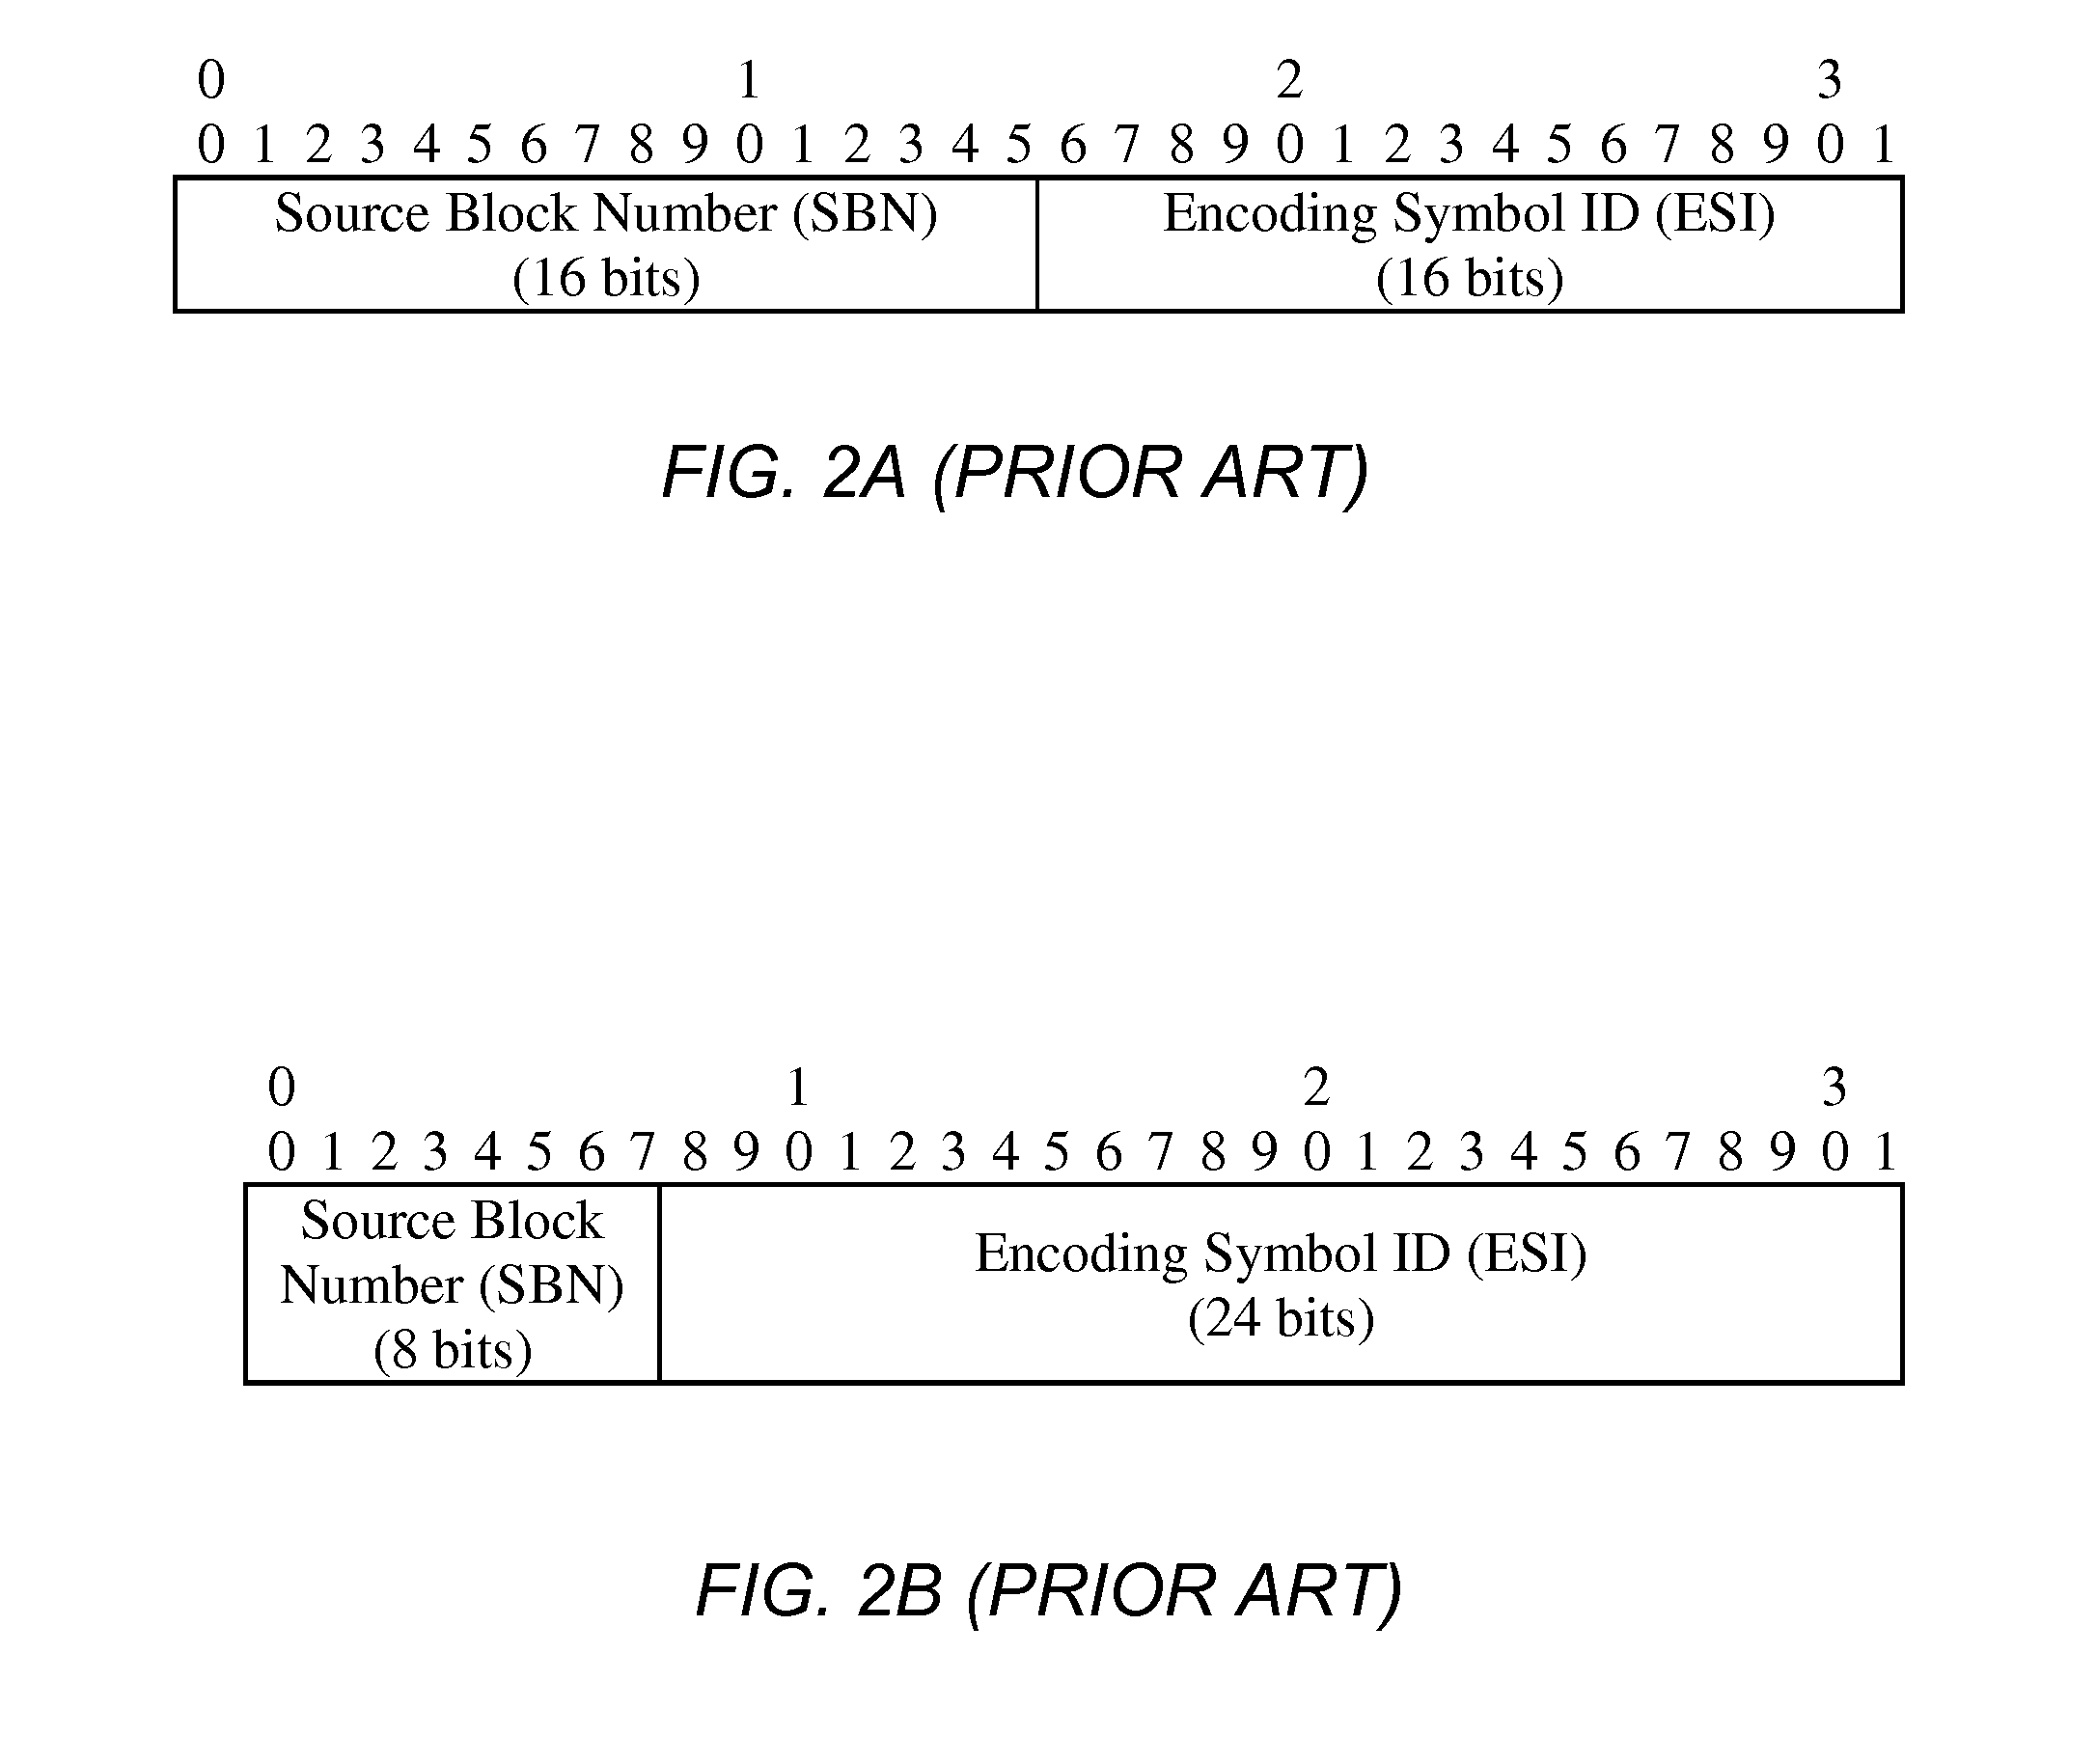 Universal object delivery and template-based file delivery